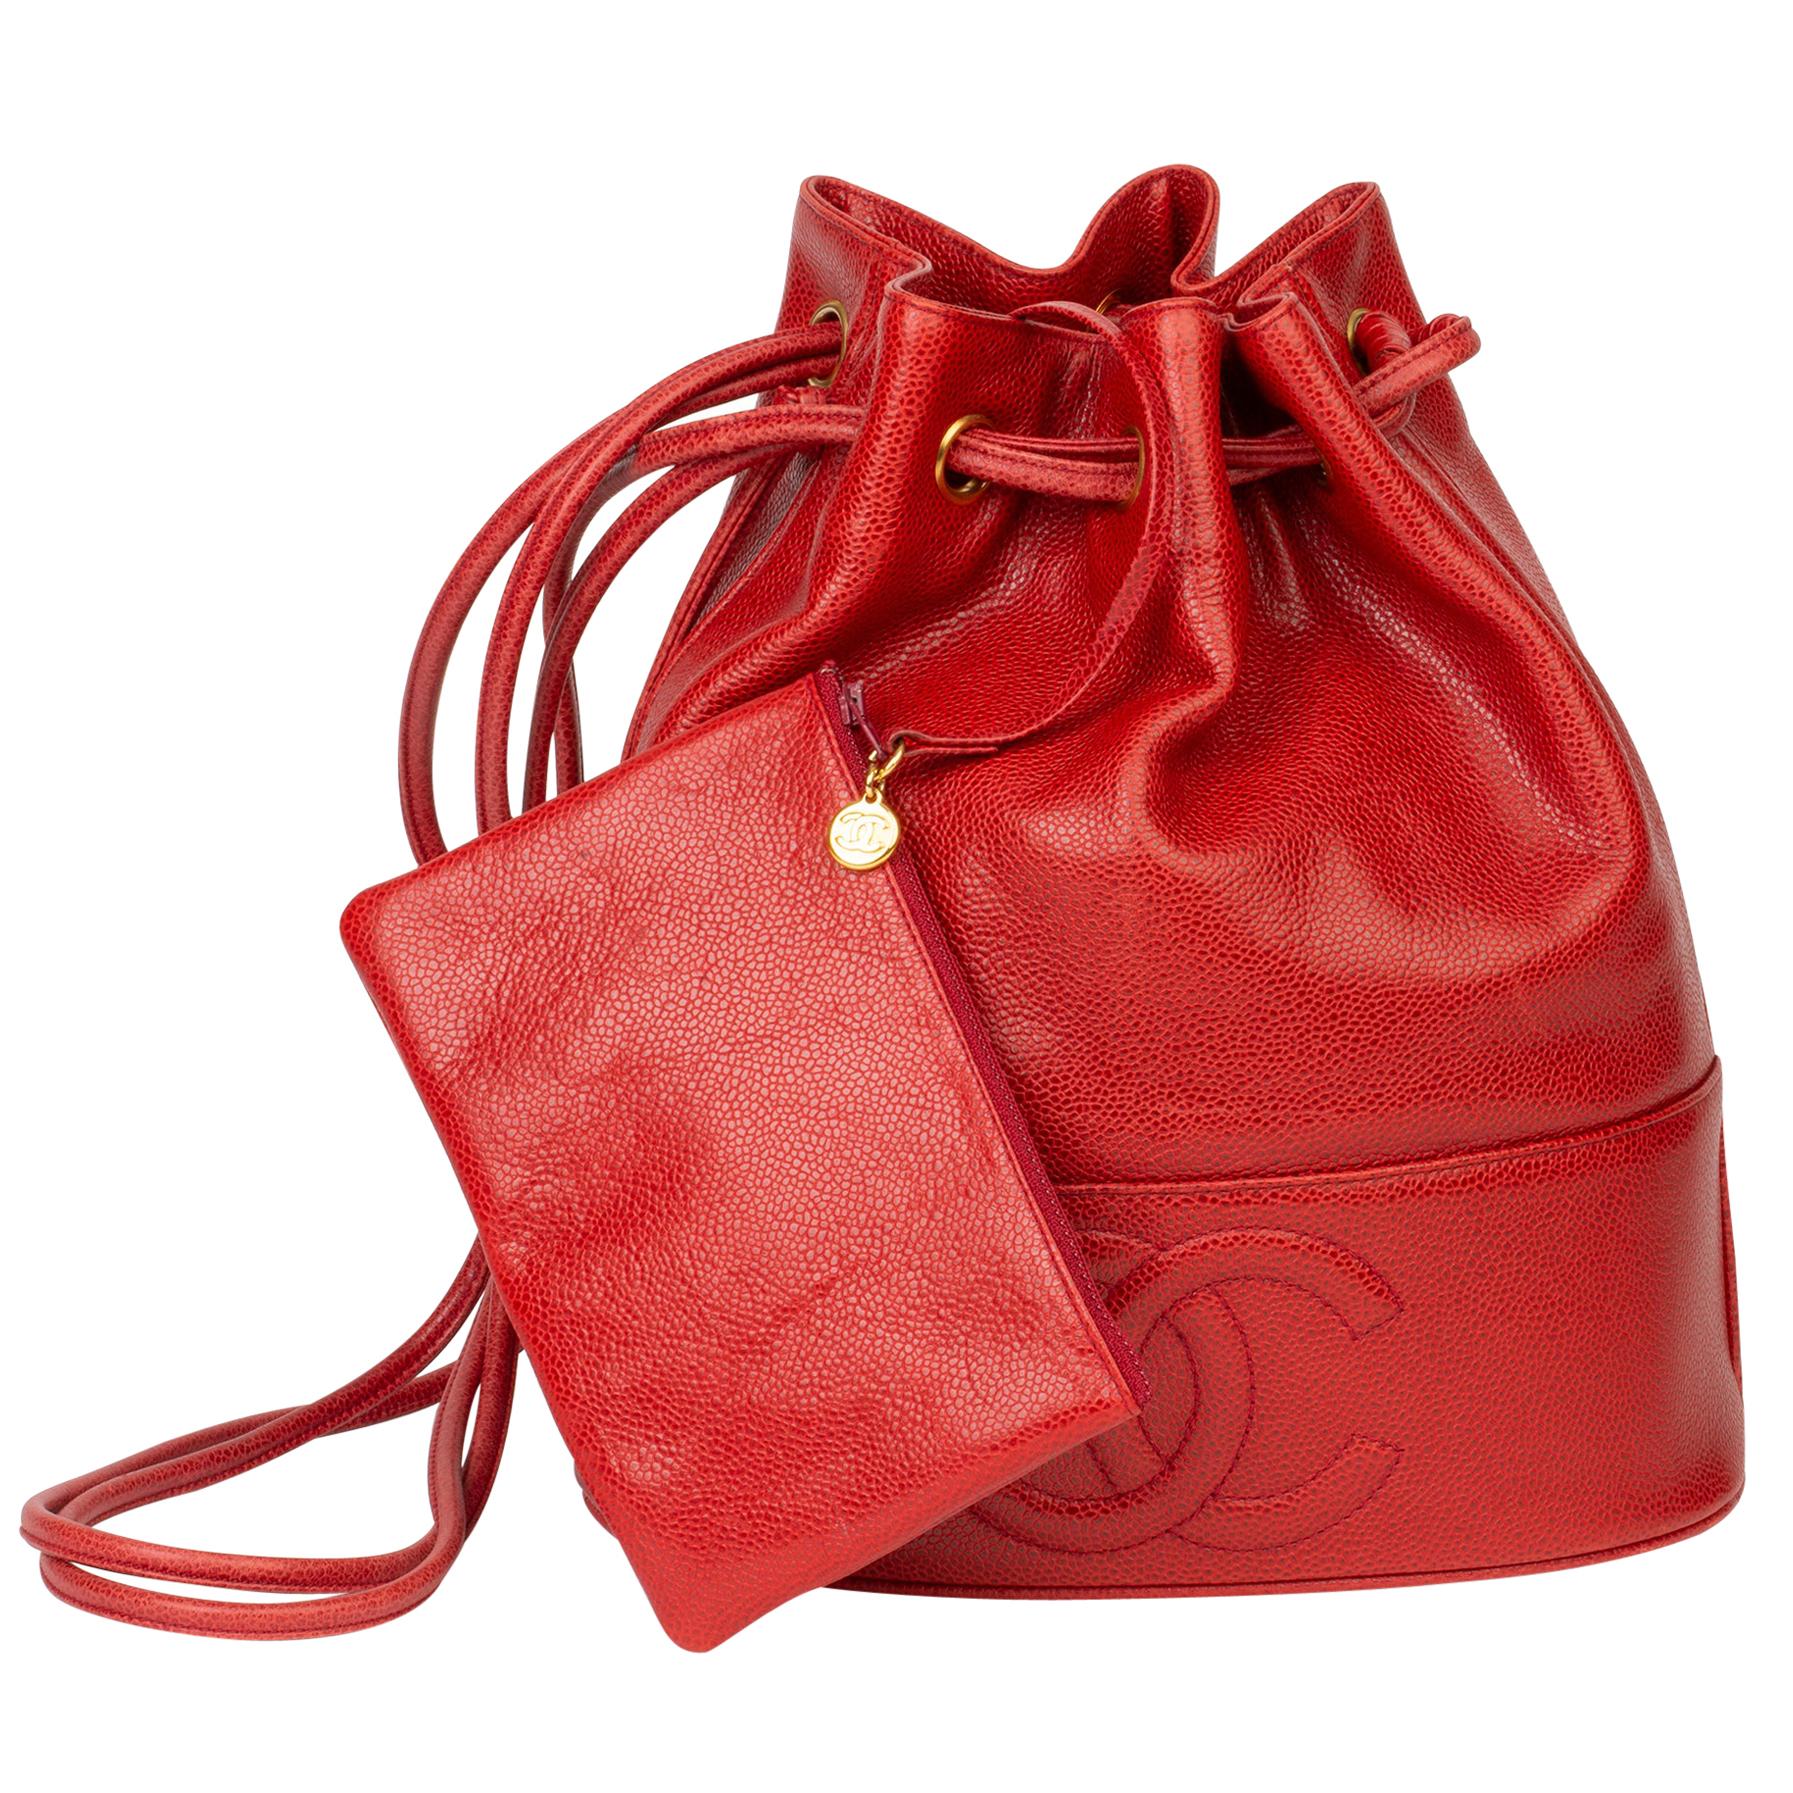 1994 Chanel Red Caviar Leather Timeless Bucket Bag with Pouch